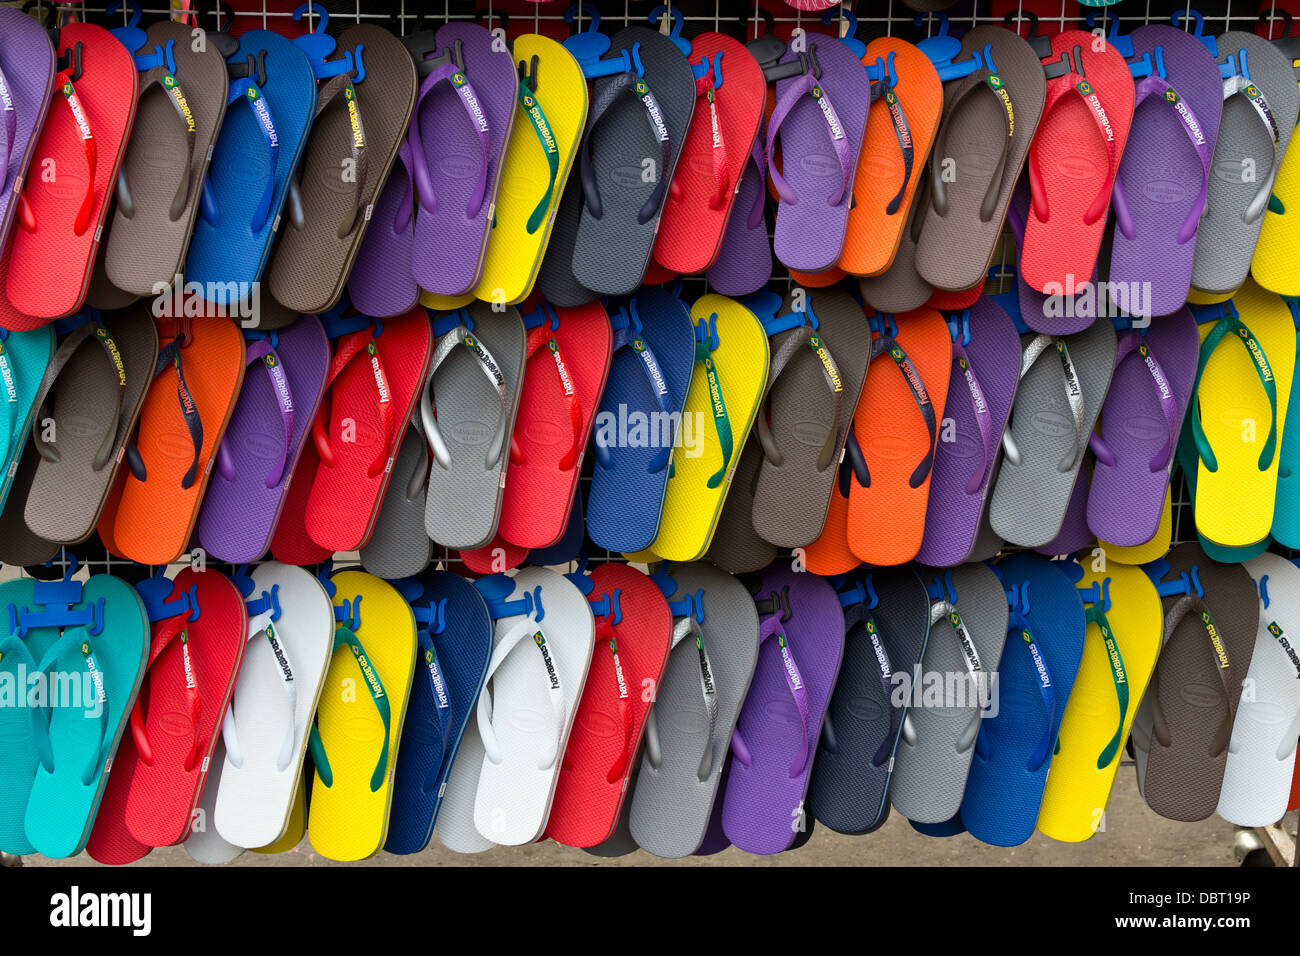 Sale of Sandals on a Market in Bangkok, Thailand Stock Photo